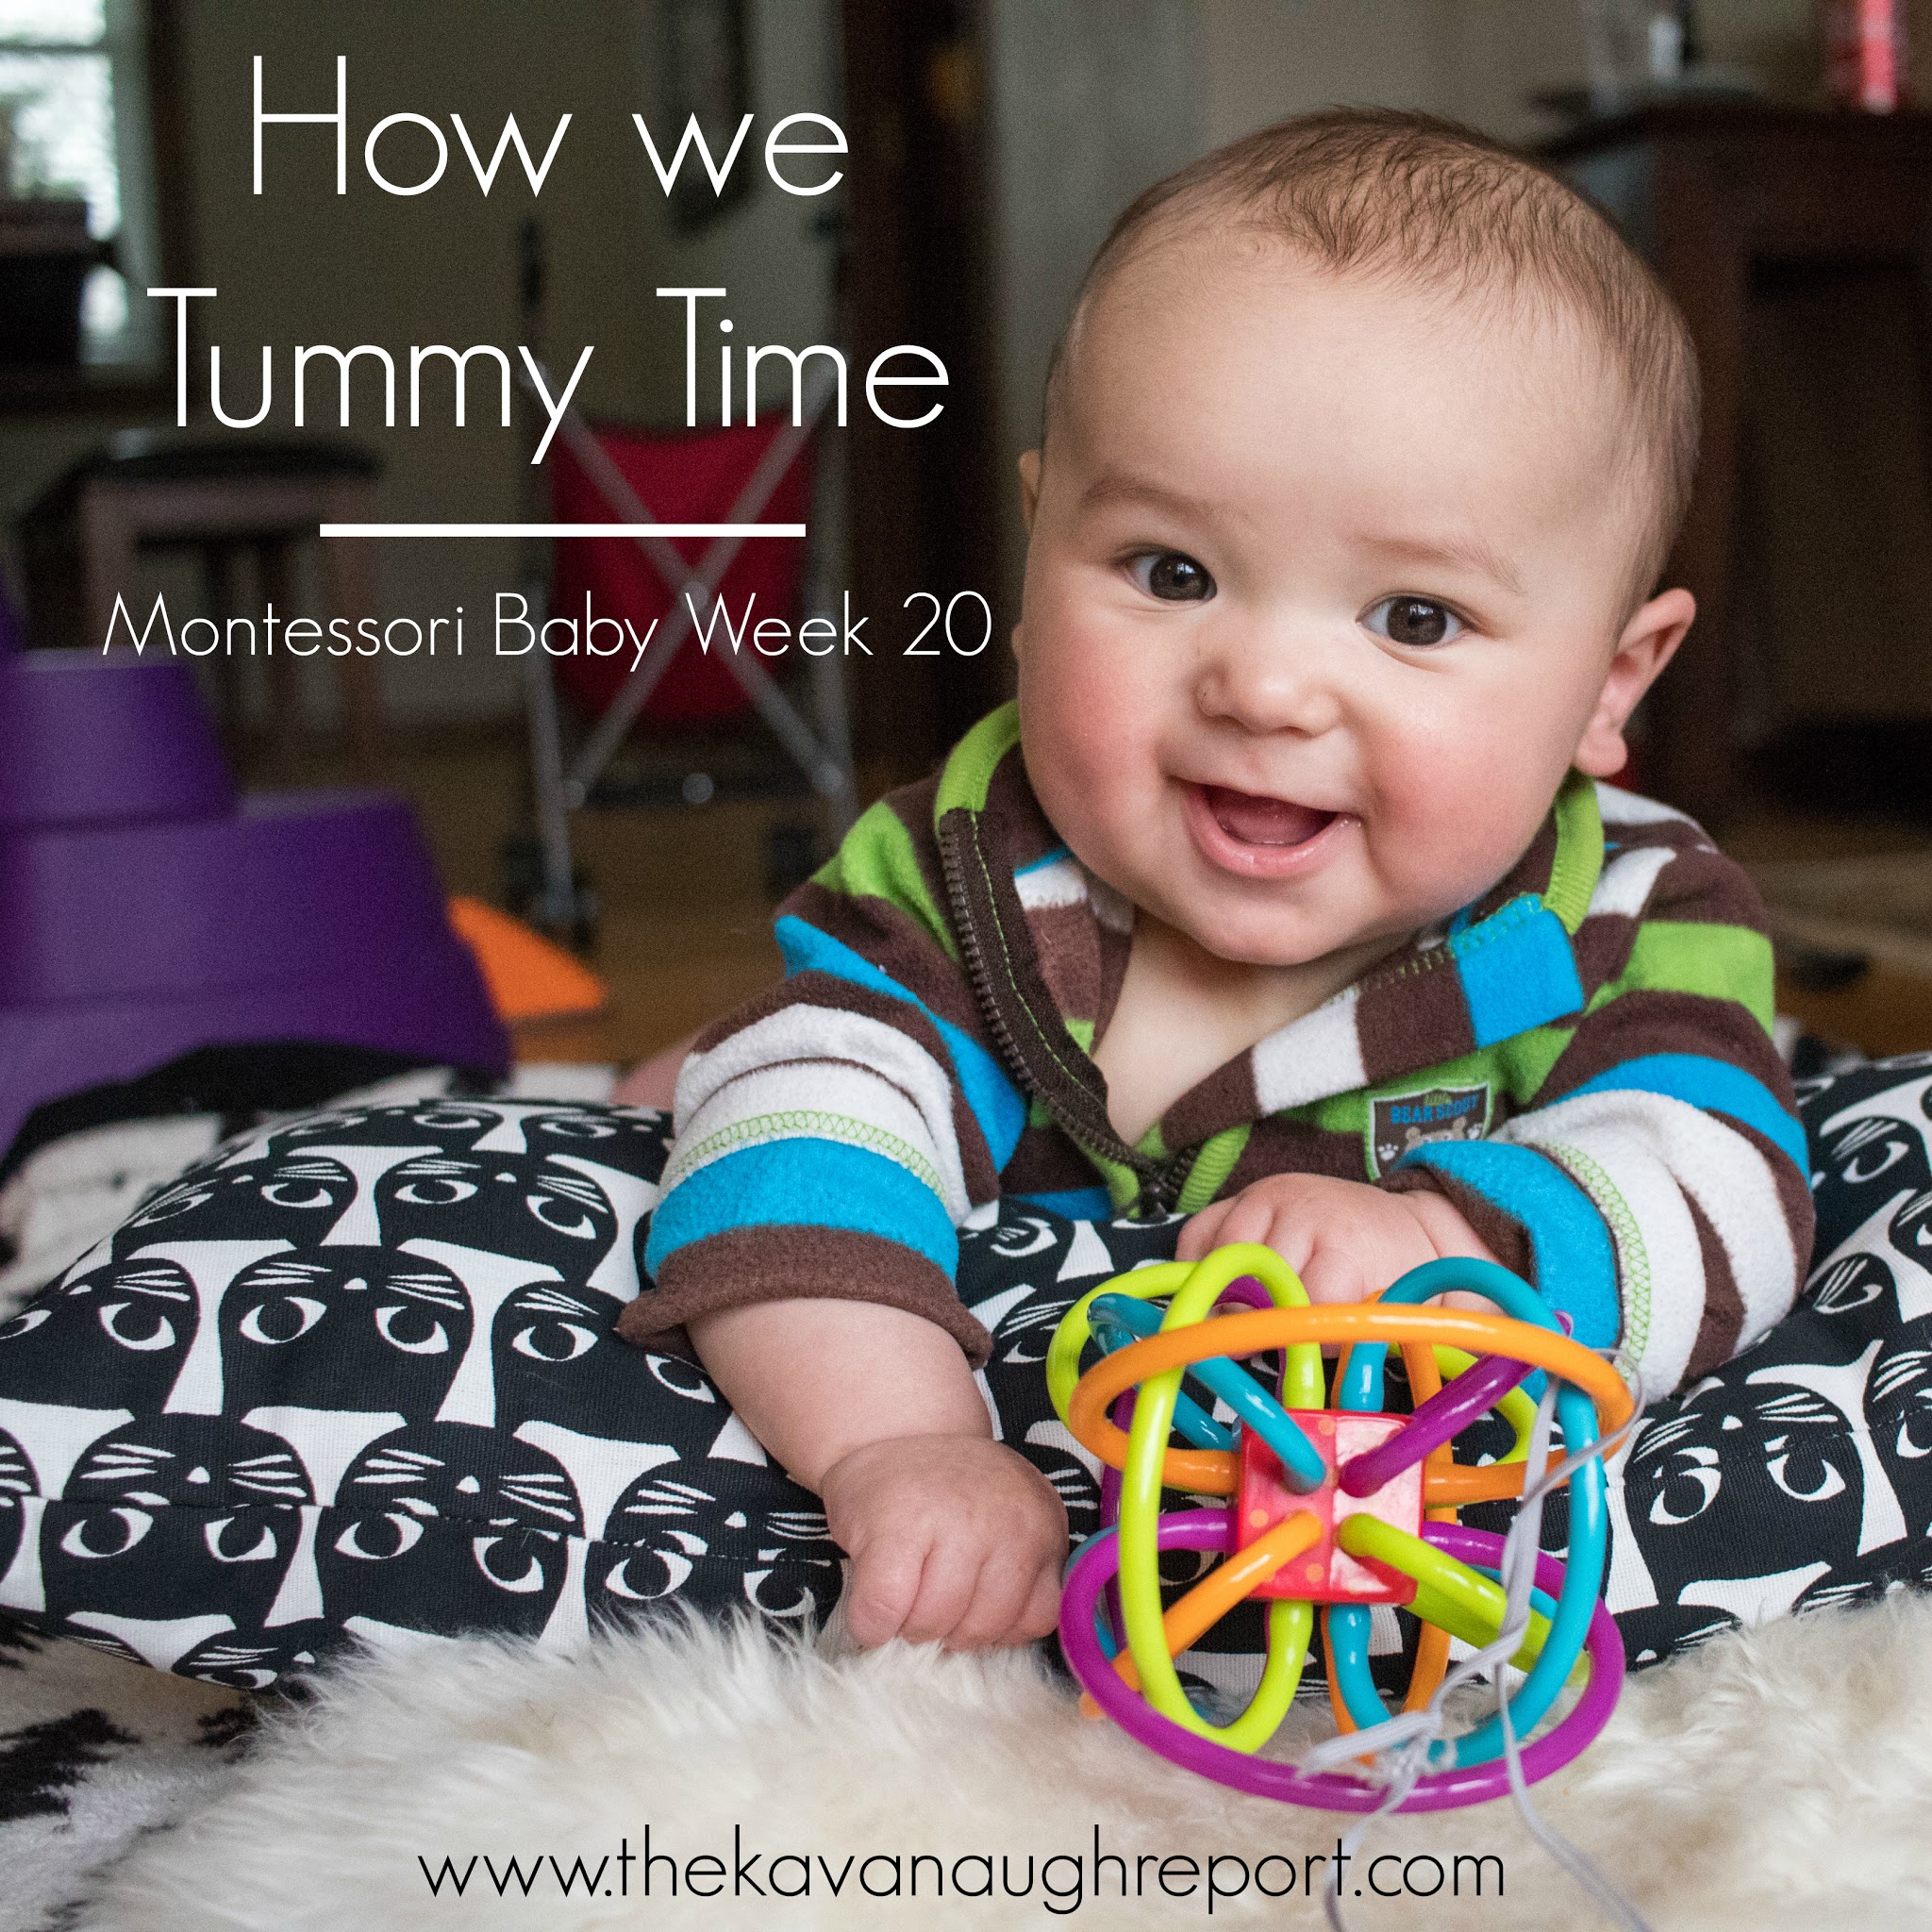 Montessori thoughts on tummy time. Here is how we do tummy time with a Montessori baby. This is one area of Montessori where the answer is not always clear.